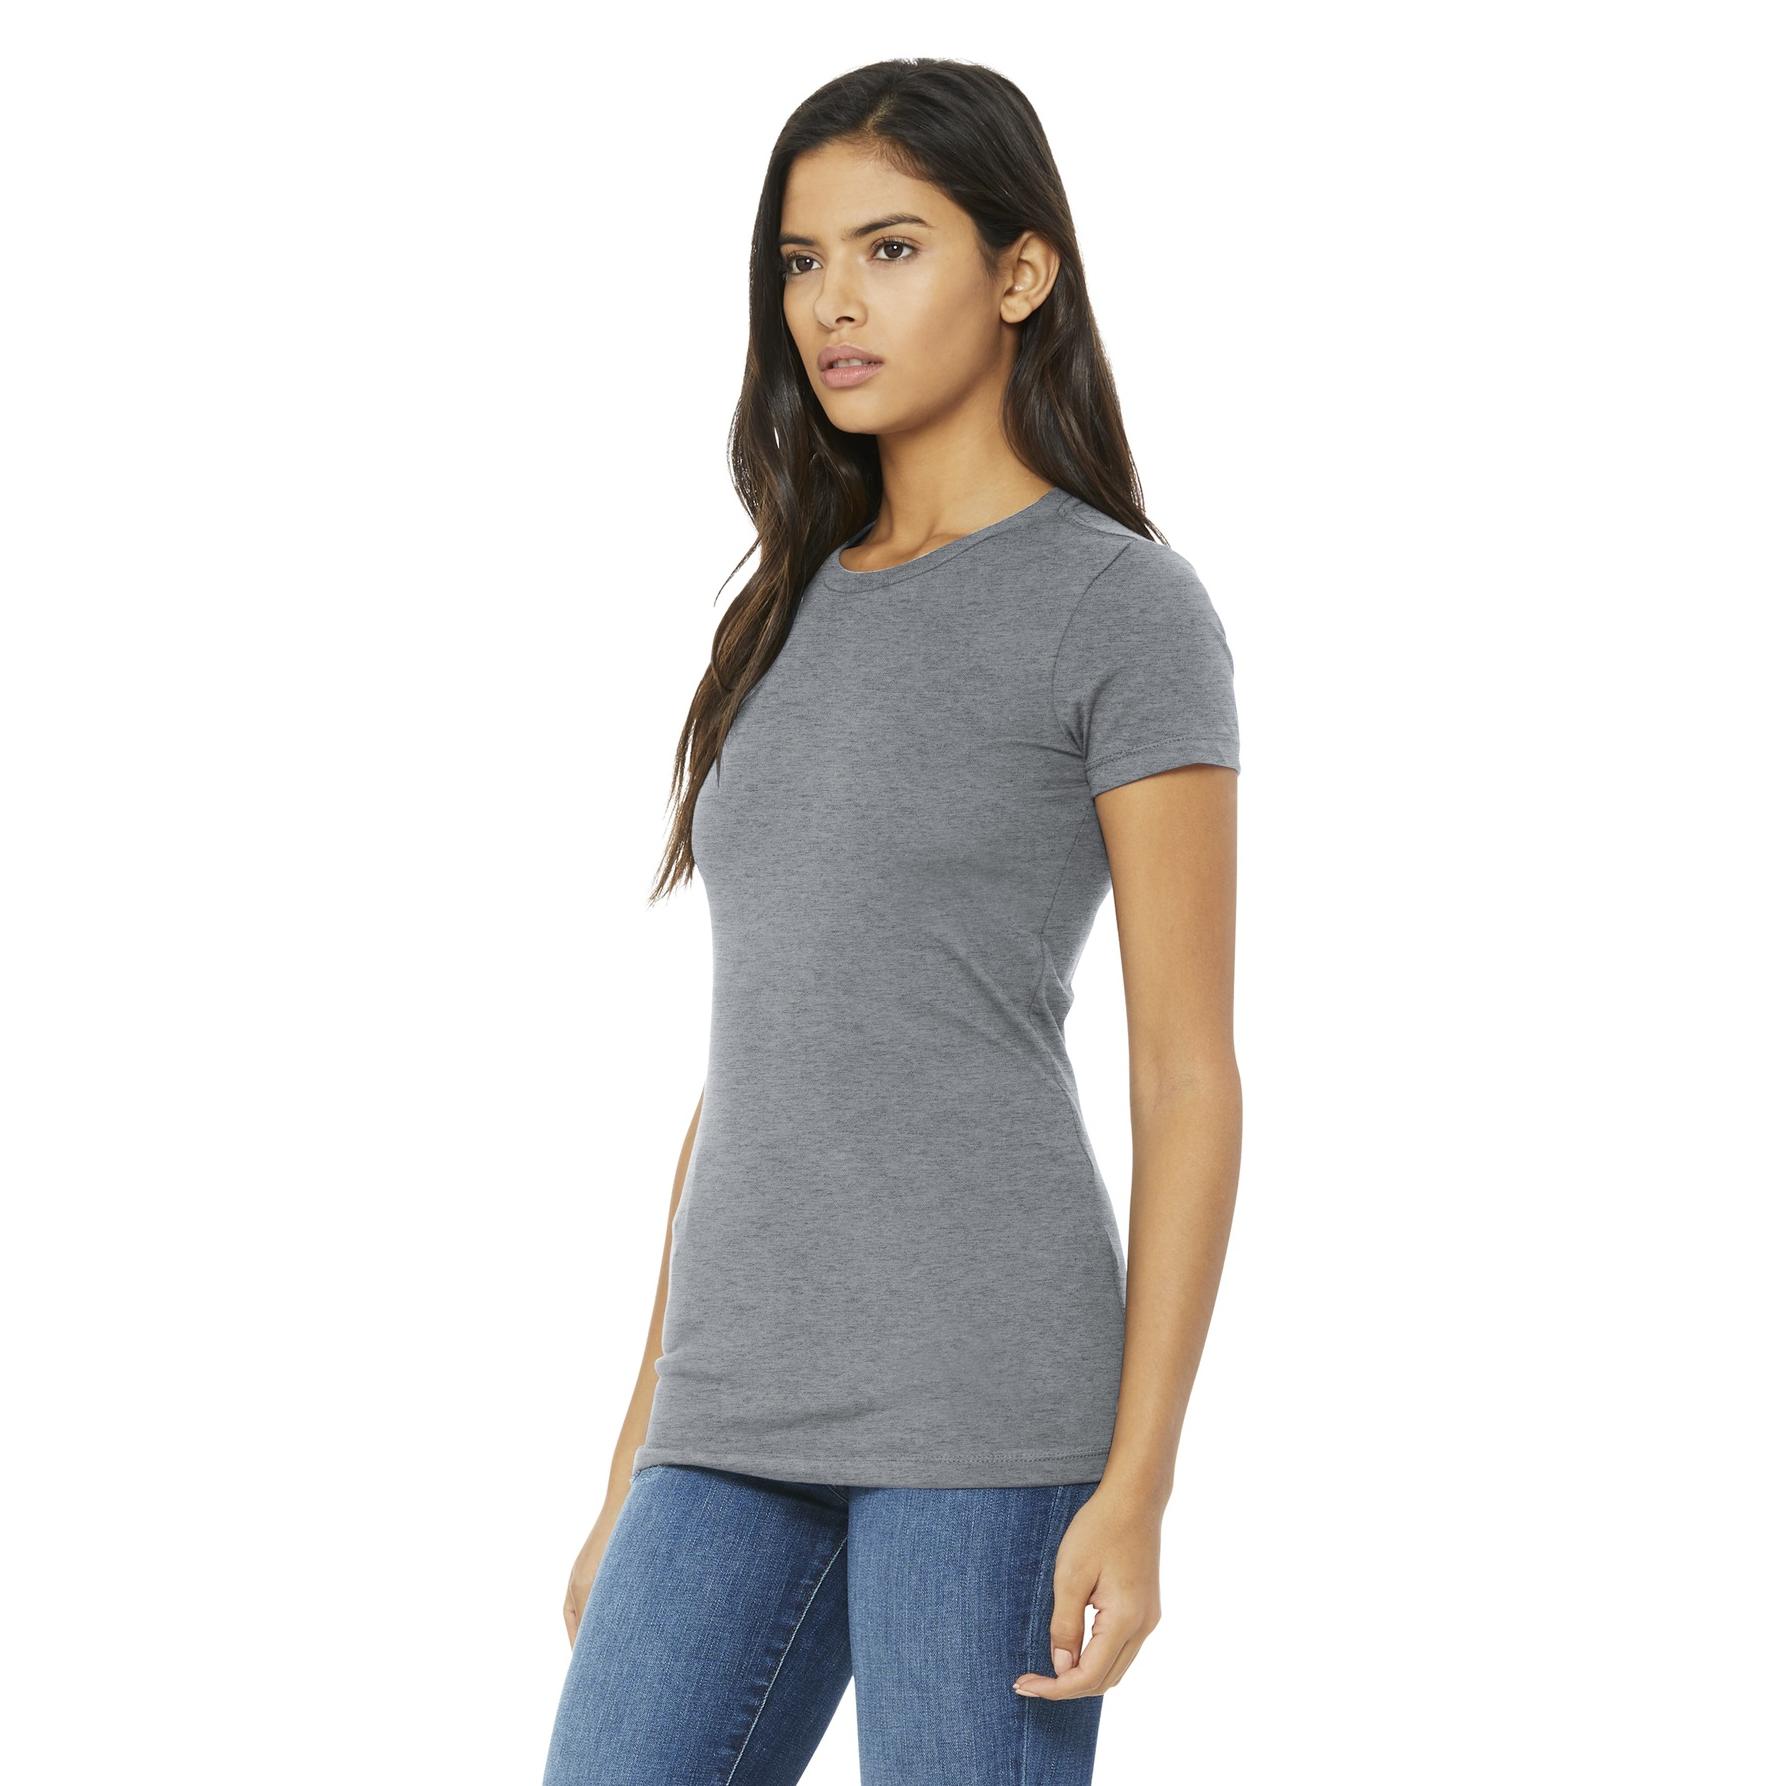 Bella + Canvas BC6004 Women's The Favorite Tee - Athletic Heather ...